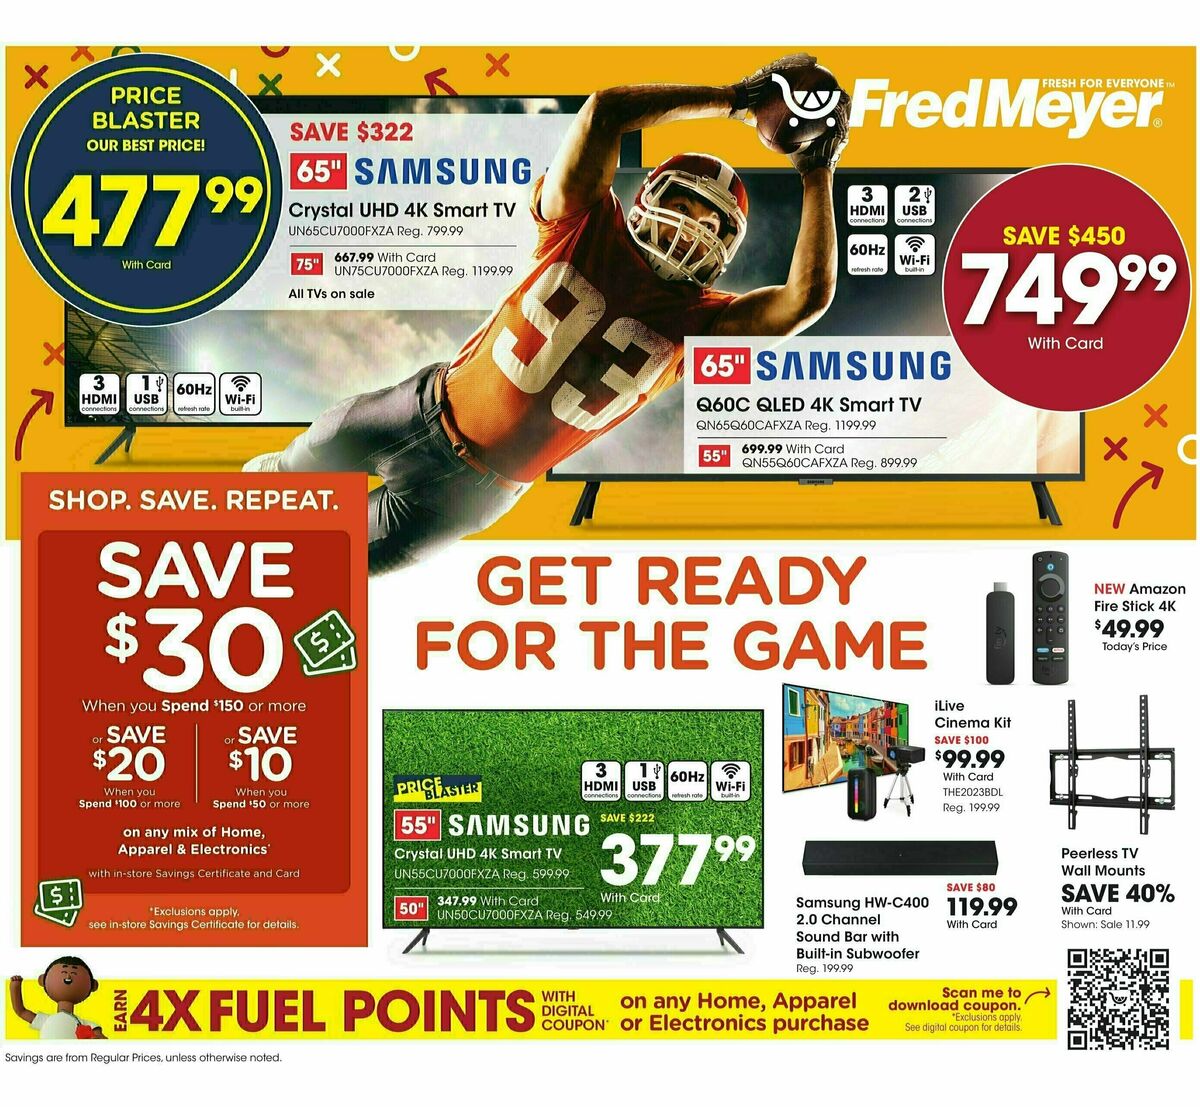 Fred Meyer Ship to Home Weekly Ad from January 3